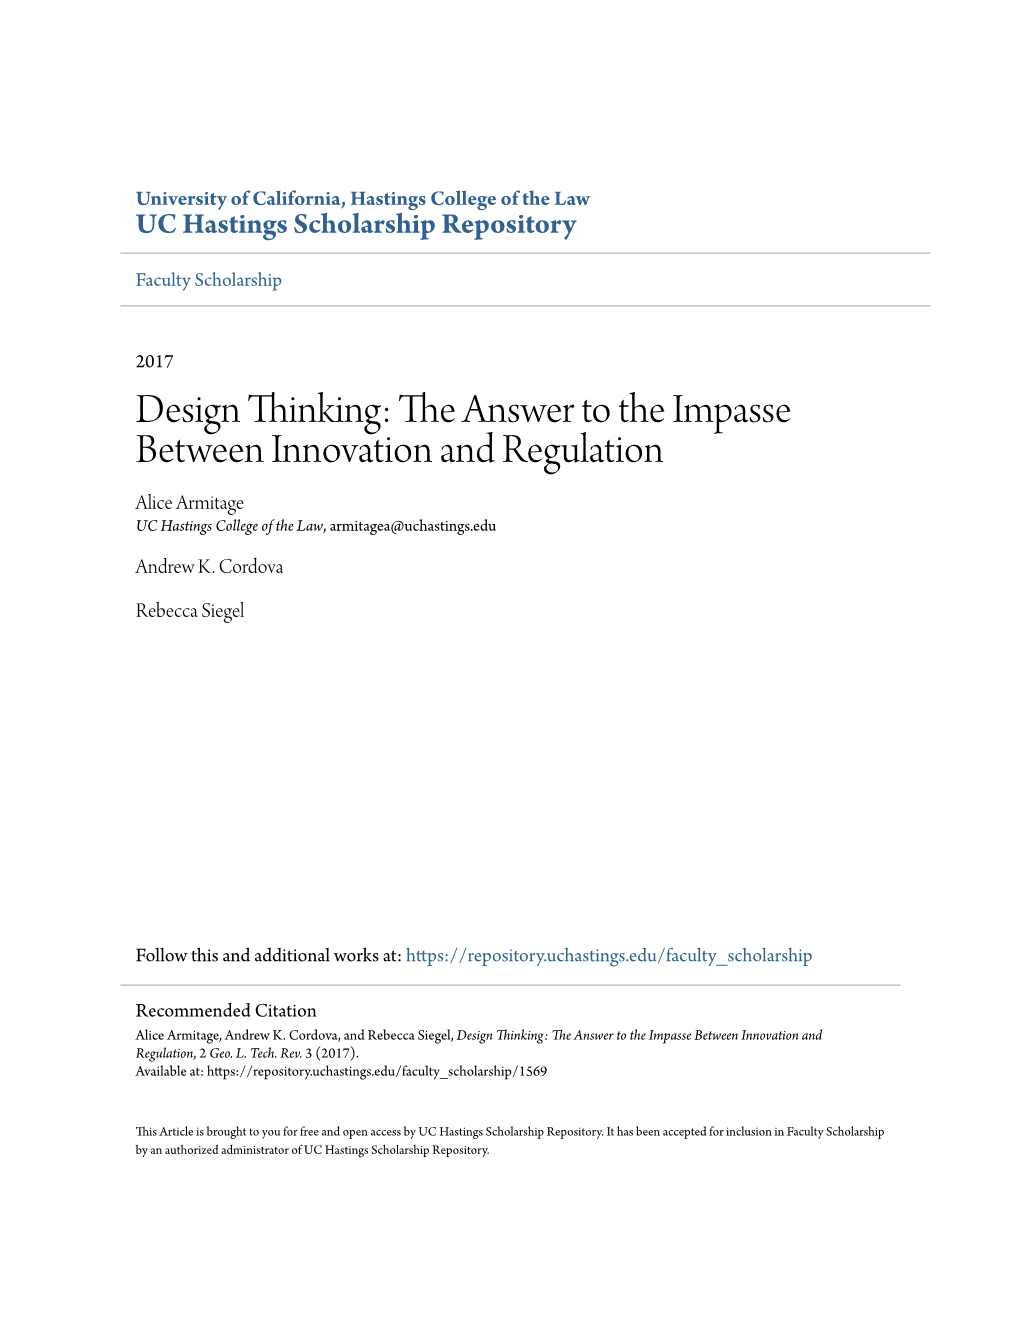 Design Thinking: the Answer to the Impasse Between Innovation and Regulation Alice Armitage UC Hastings College of the Law, Armitagea@Uchastings.Edu